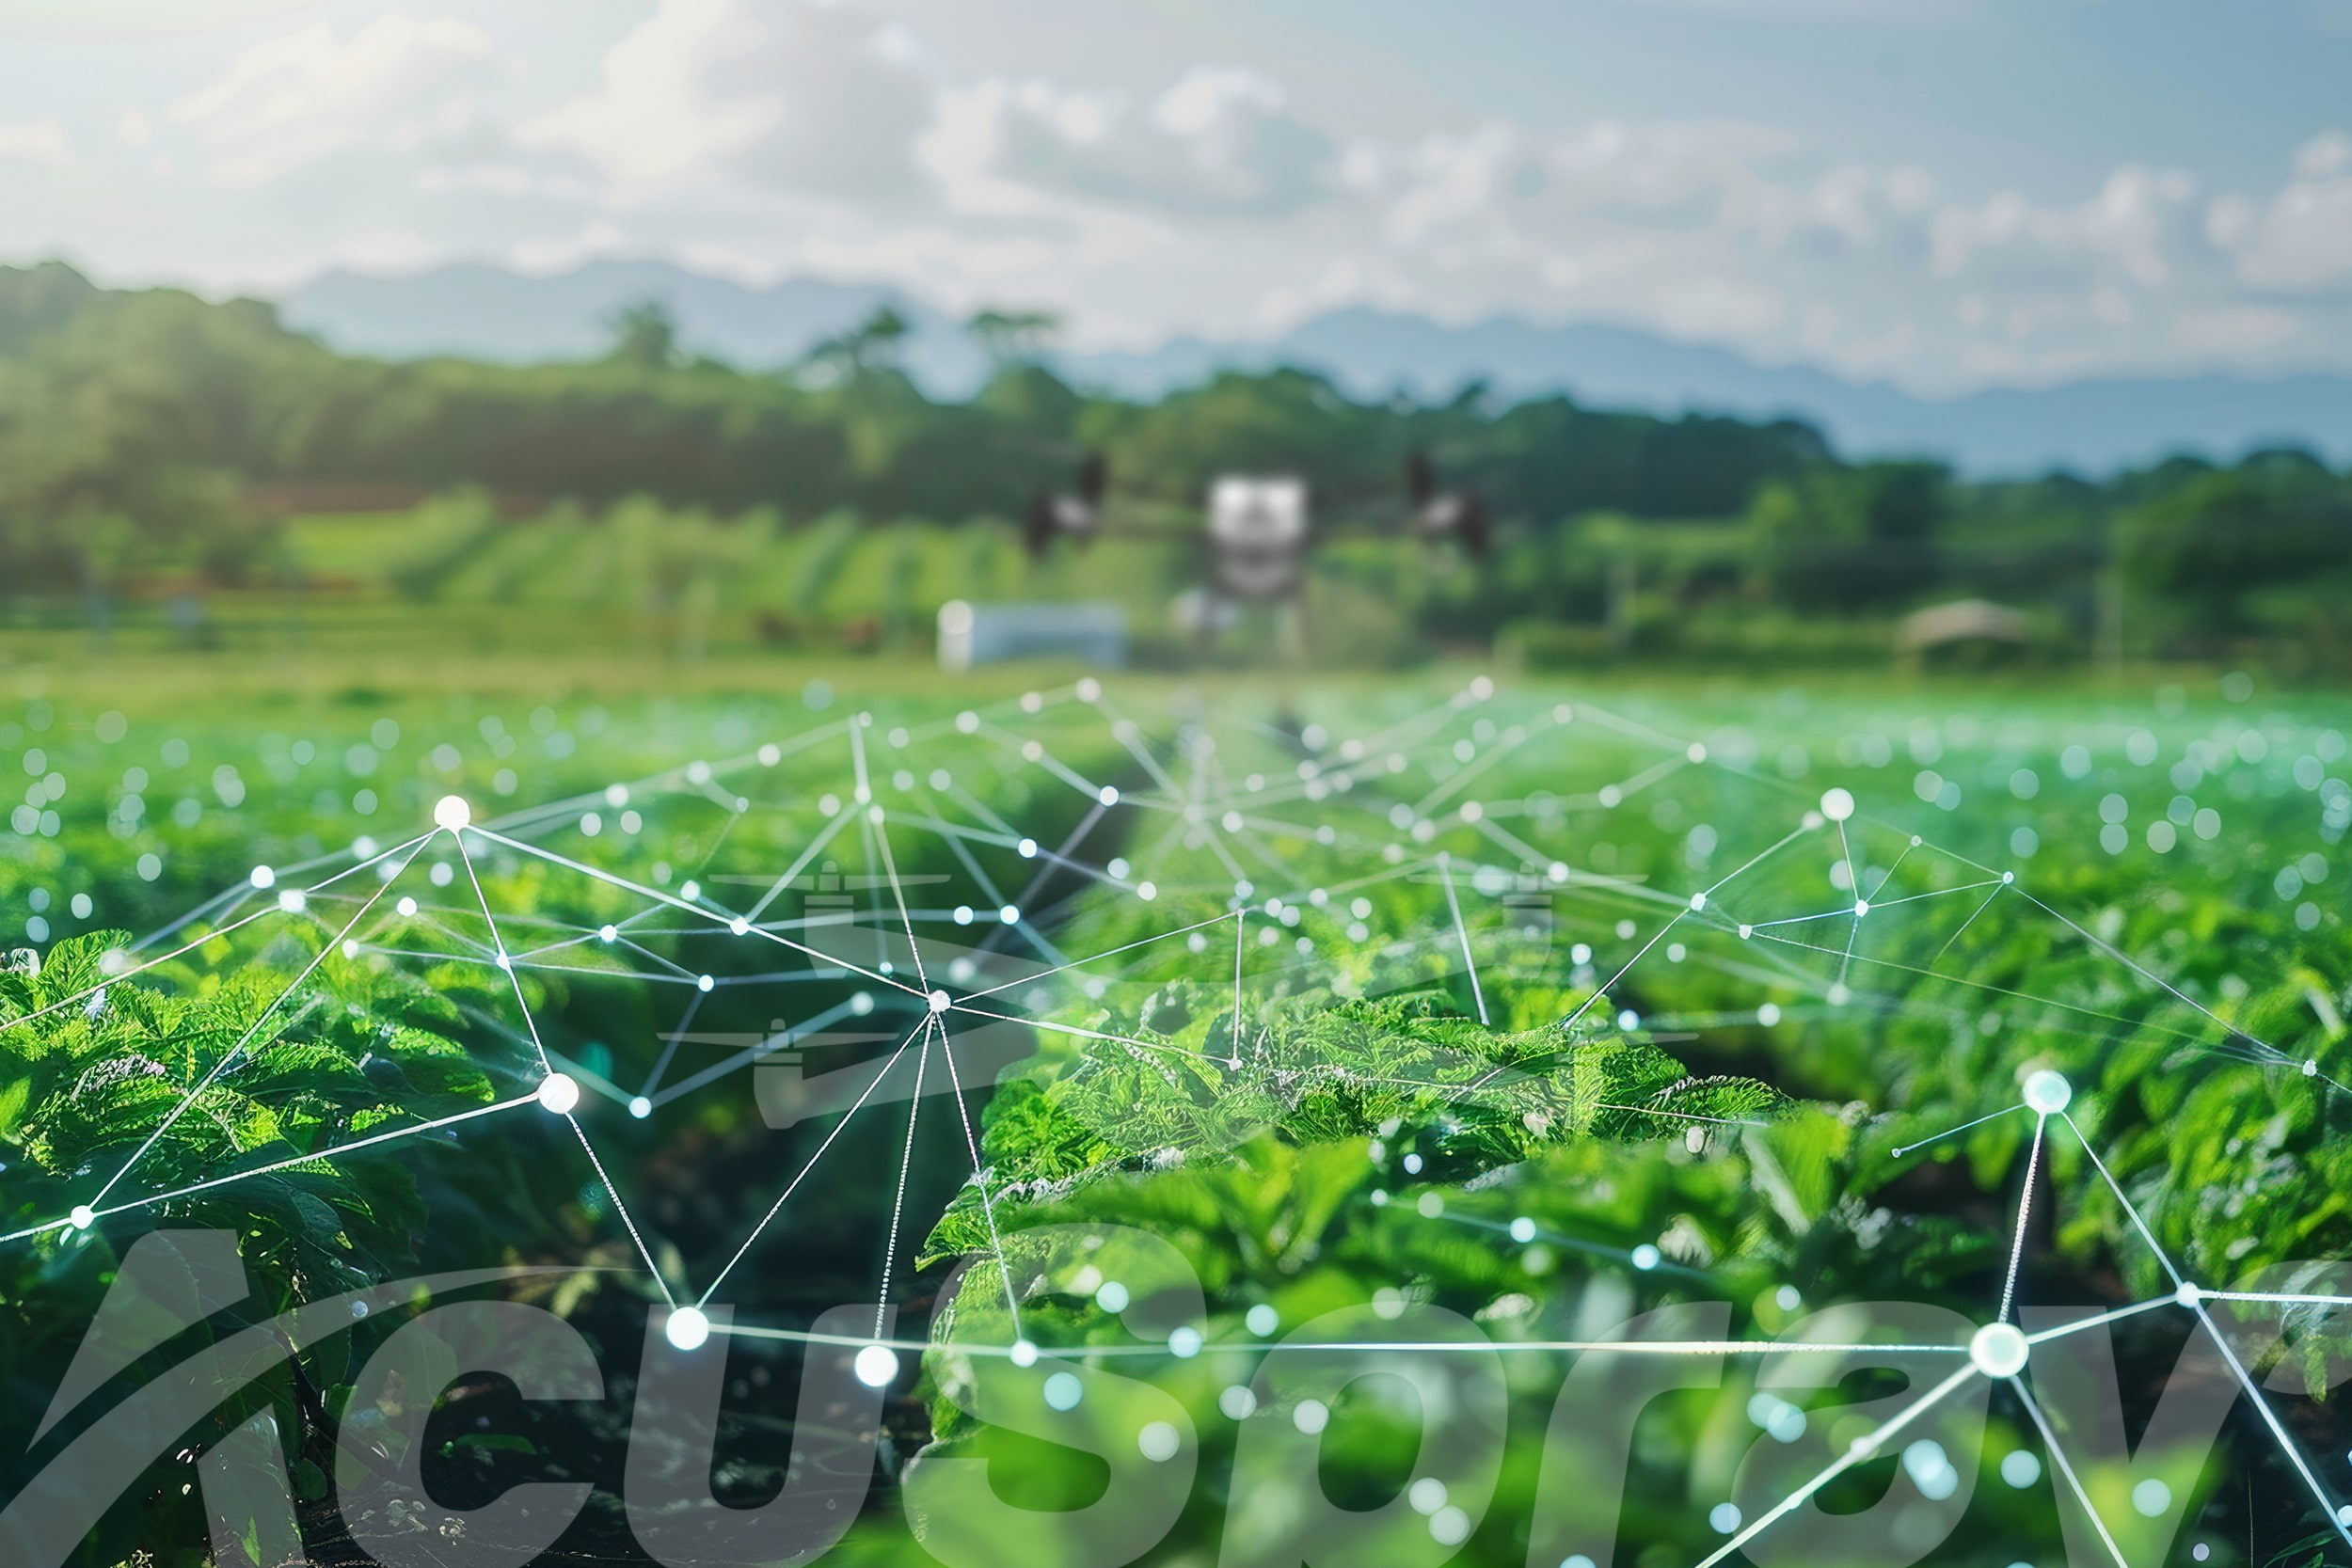 An agricultural spray drone flying over a lush potato field with digital network connections, representing the use of spray drones in potato farming by AcuSpray.